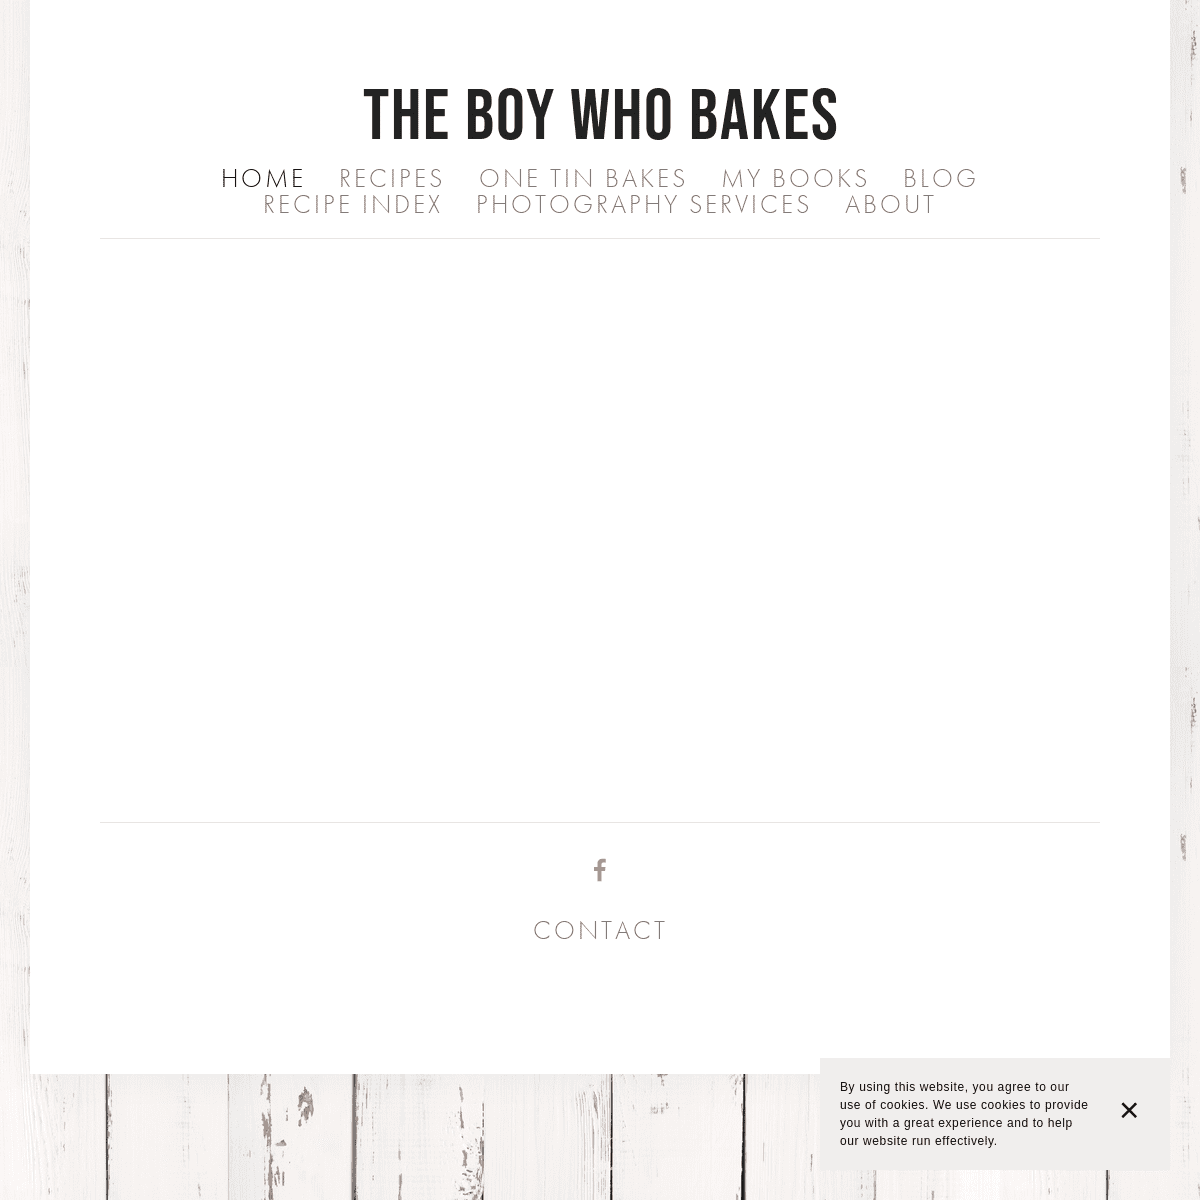 A complete backup of https://theboywhobakes.co.uk